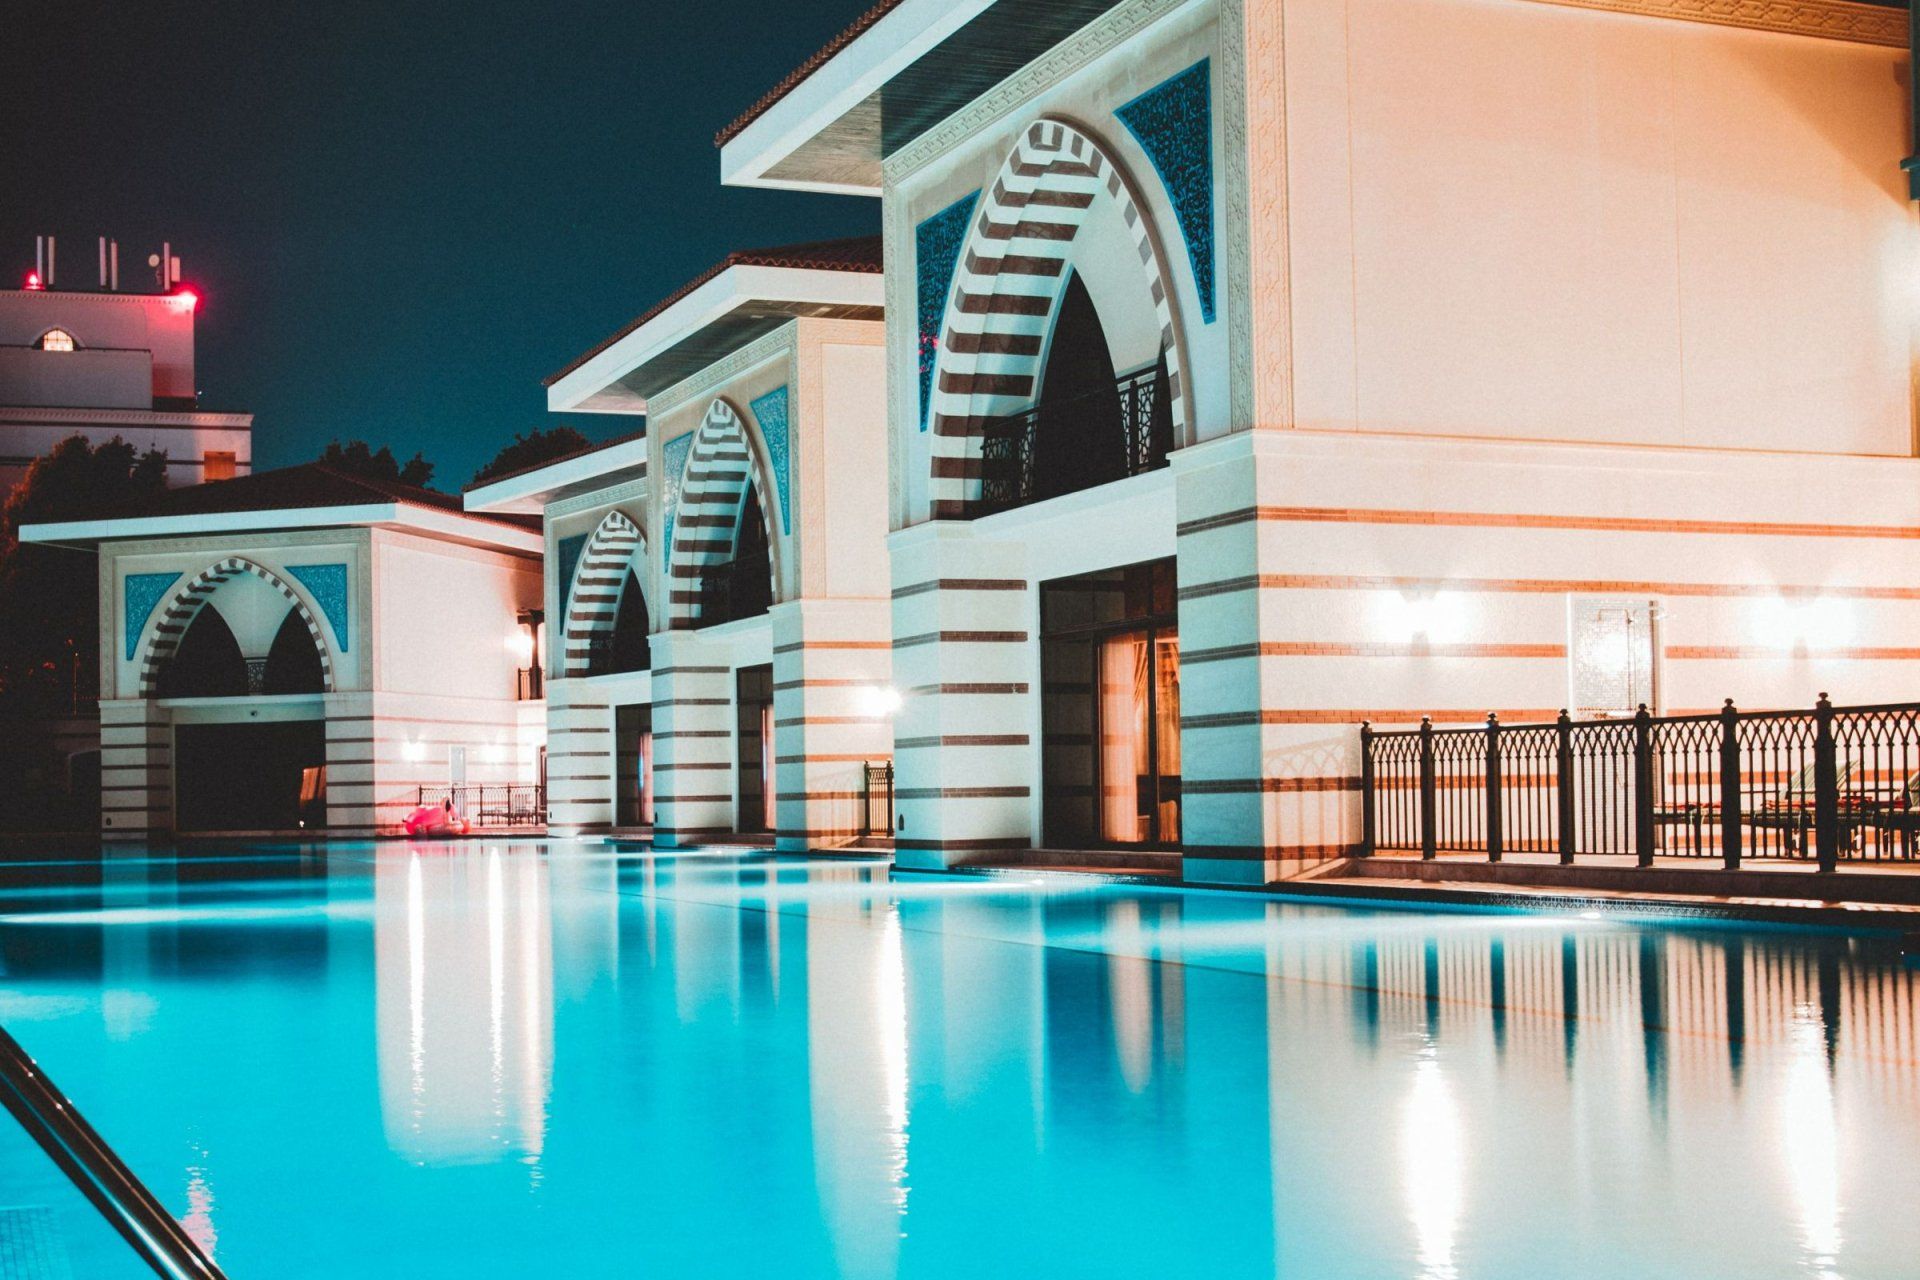 a swimming pool in front of a building at night